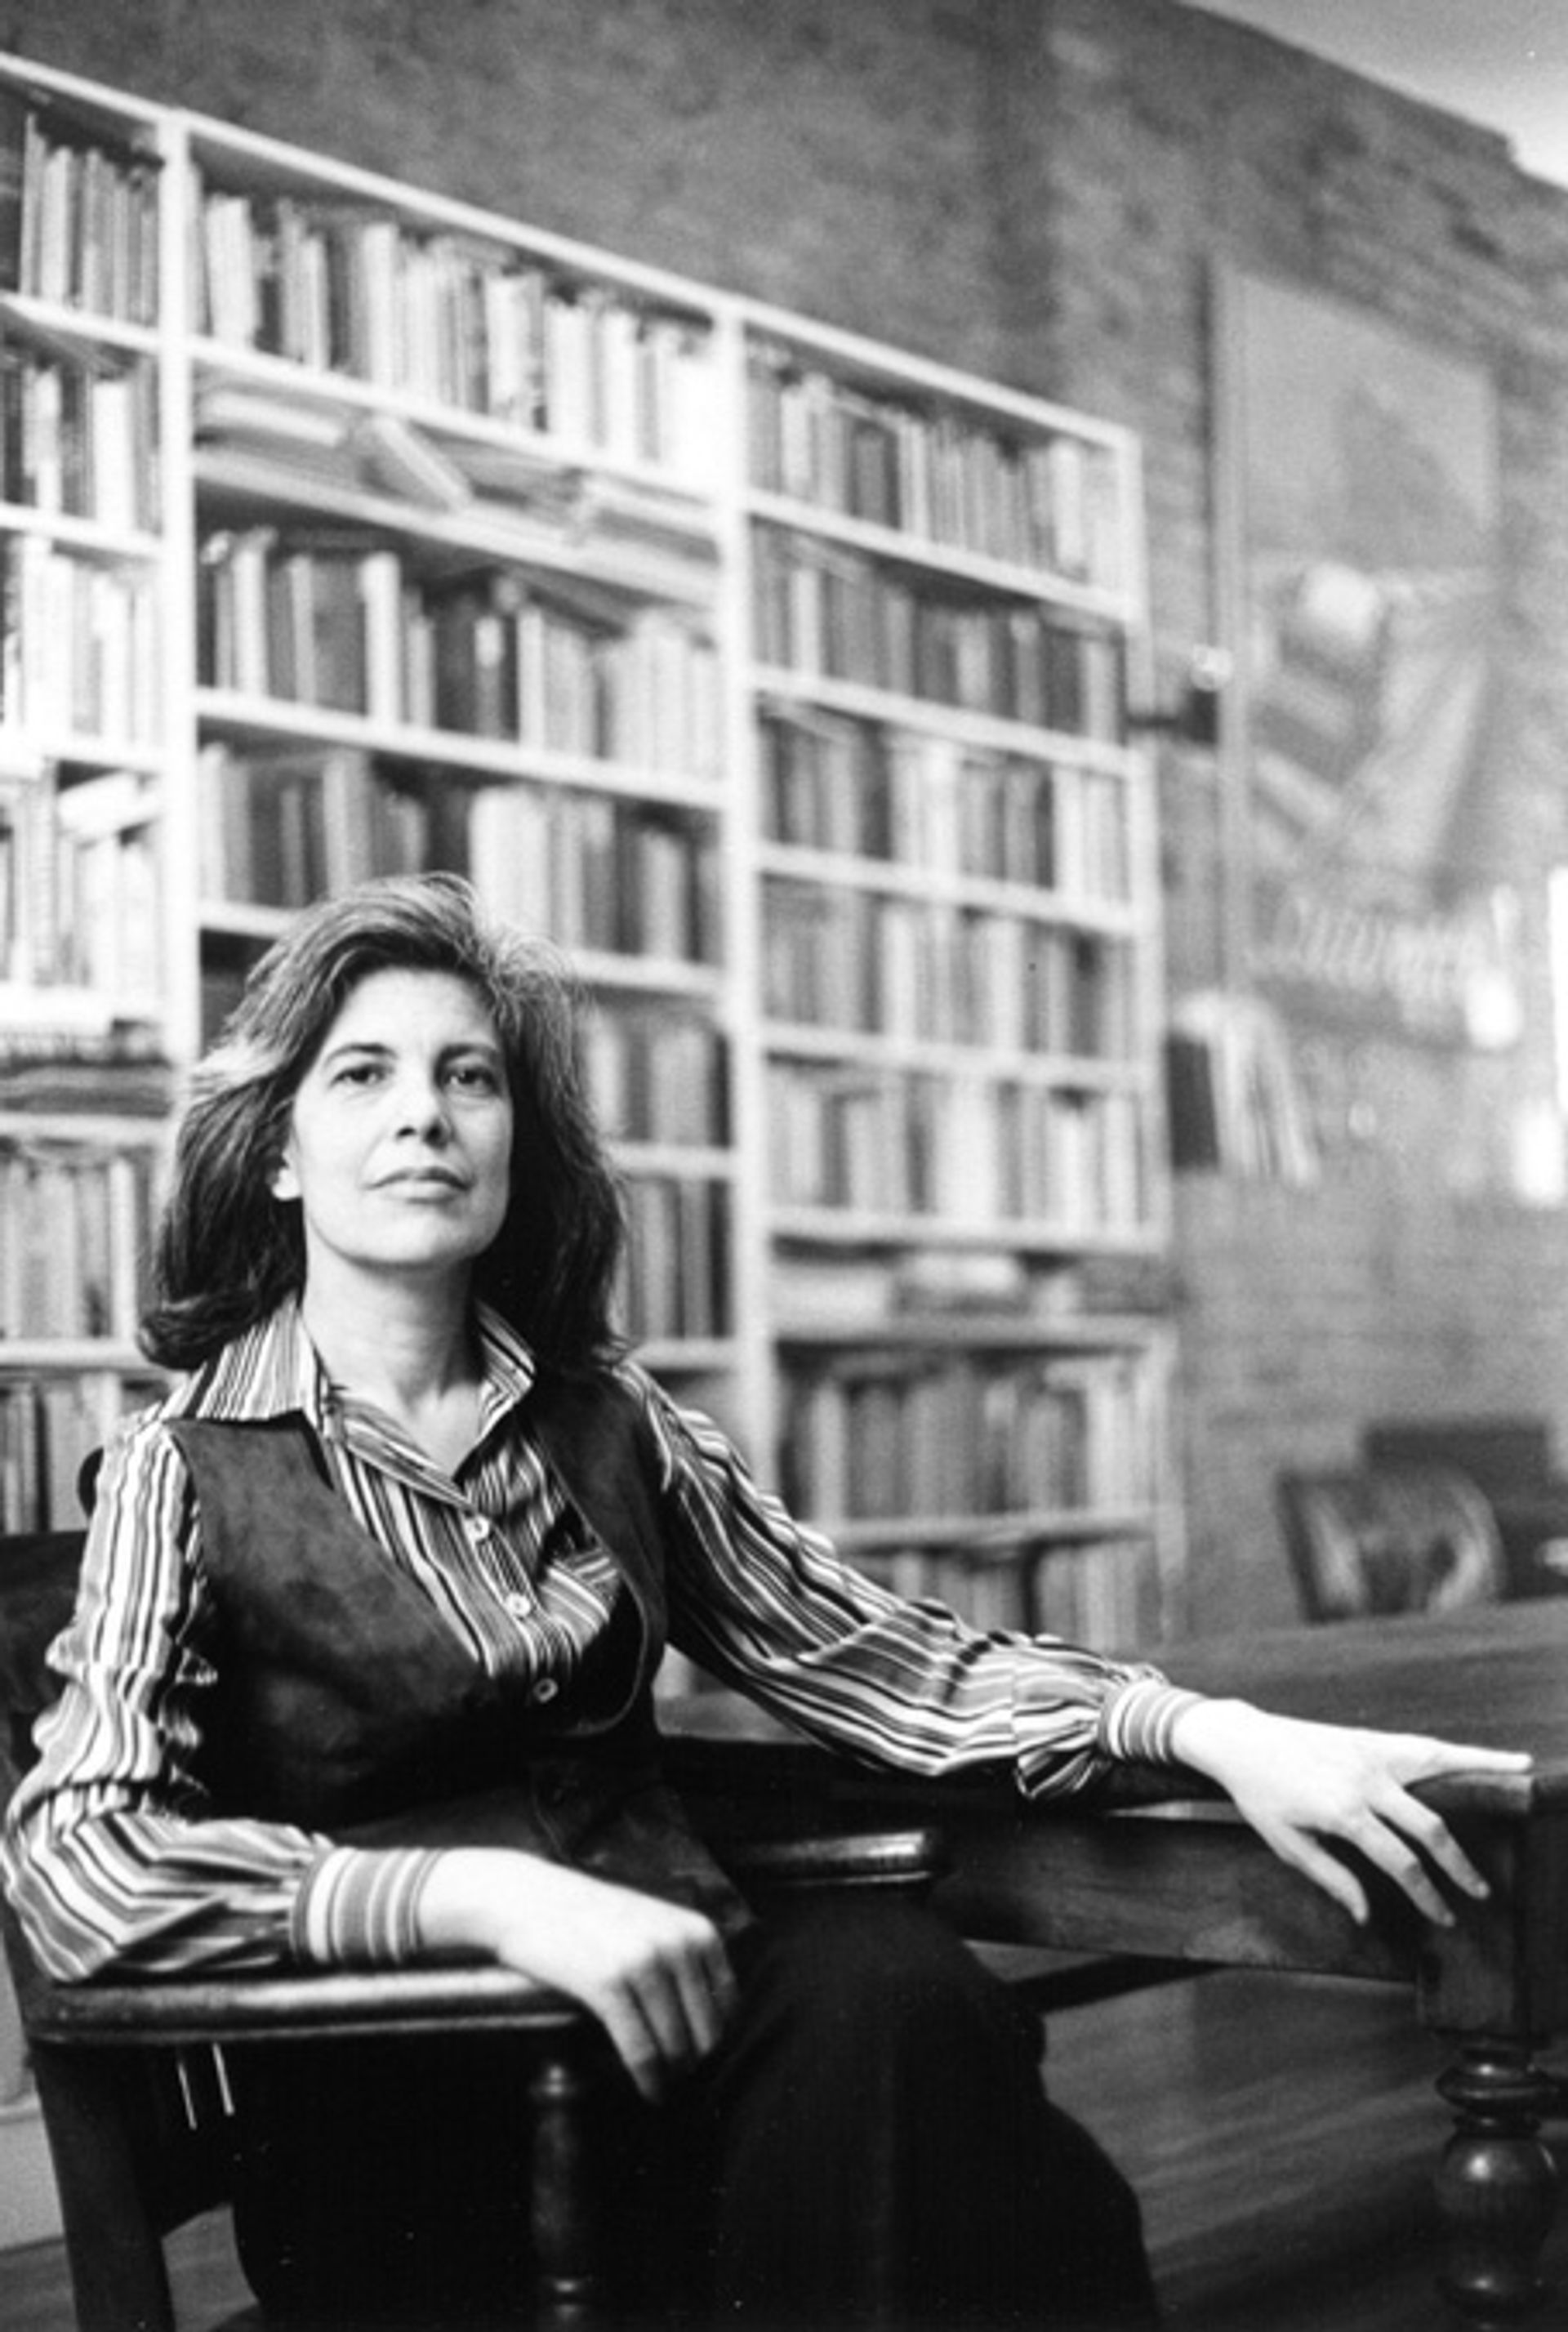 Susan Sontag photographed in 1979.

Lynn Gilbert via Wikimedia Commons